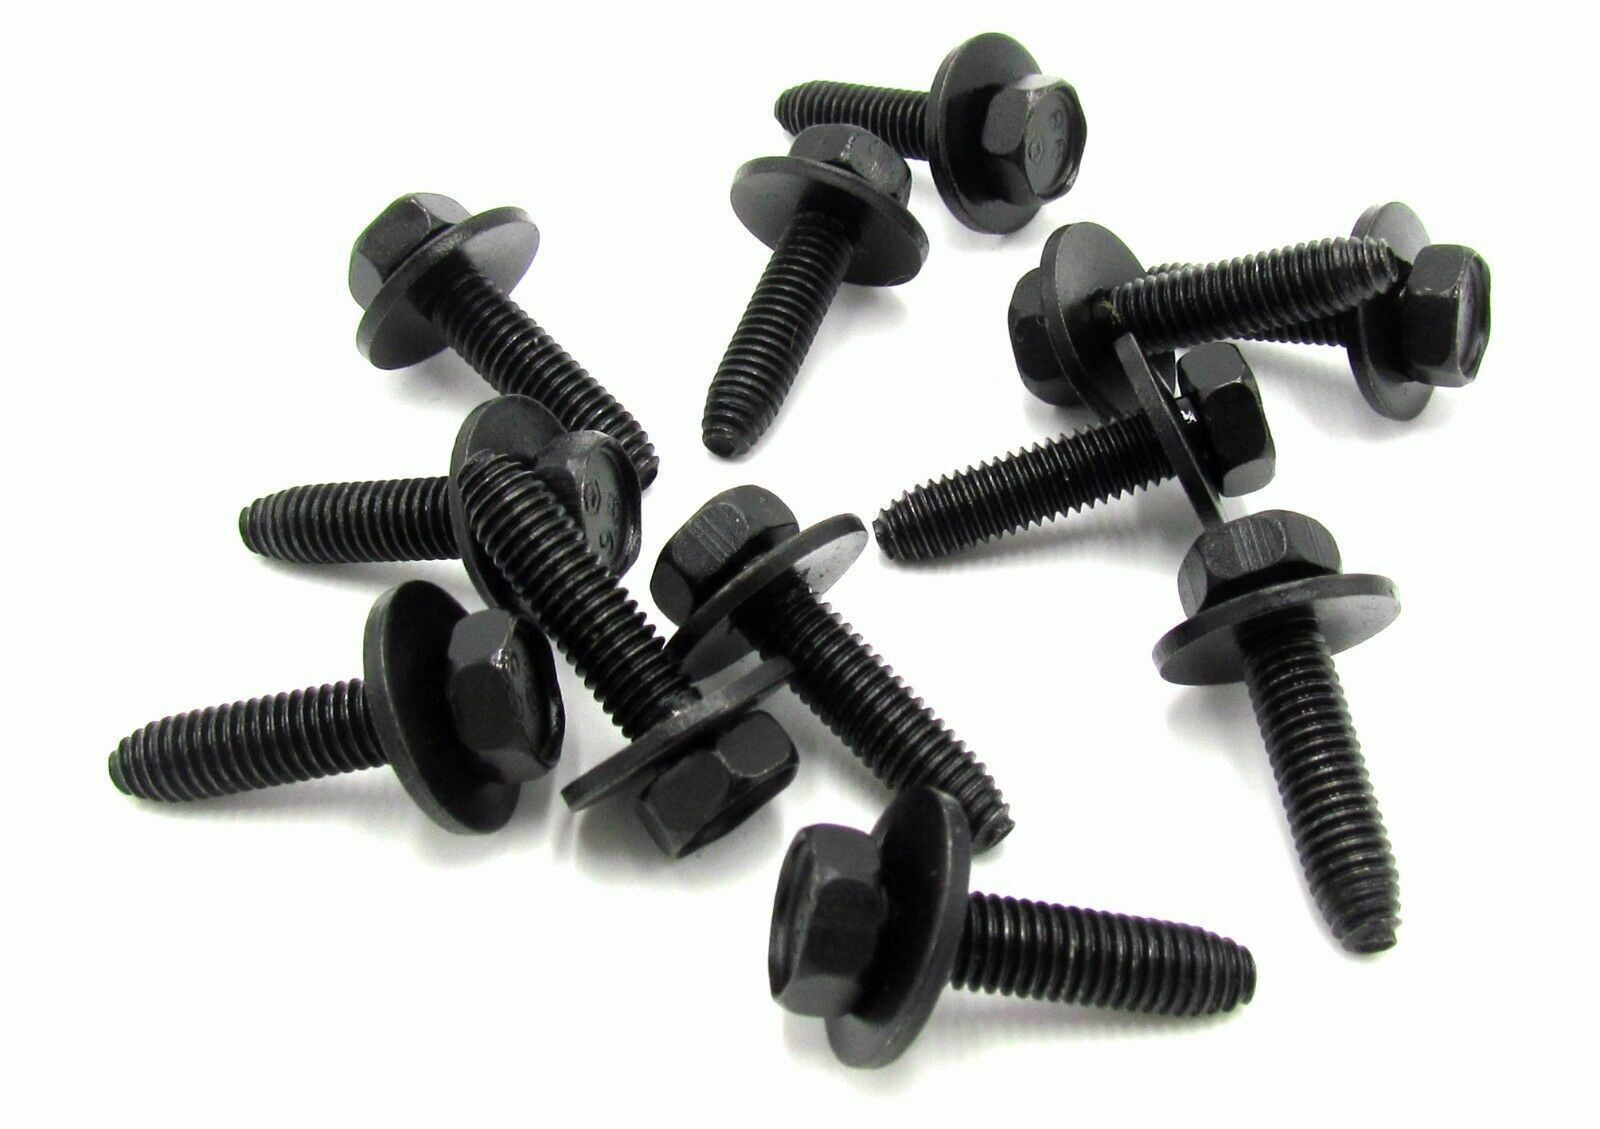 50 GM 10 MM Head M6 - 1.0 x 25mm Hex Head SEMS Bolts with Loose Washer 11503834